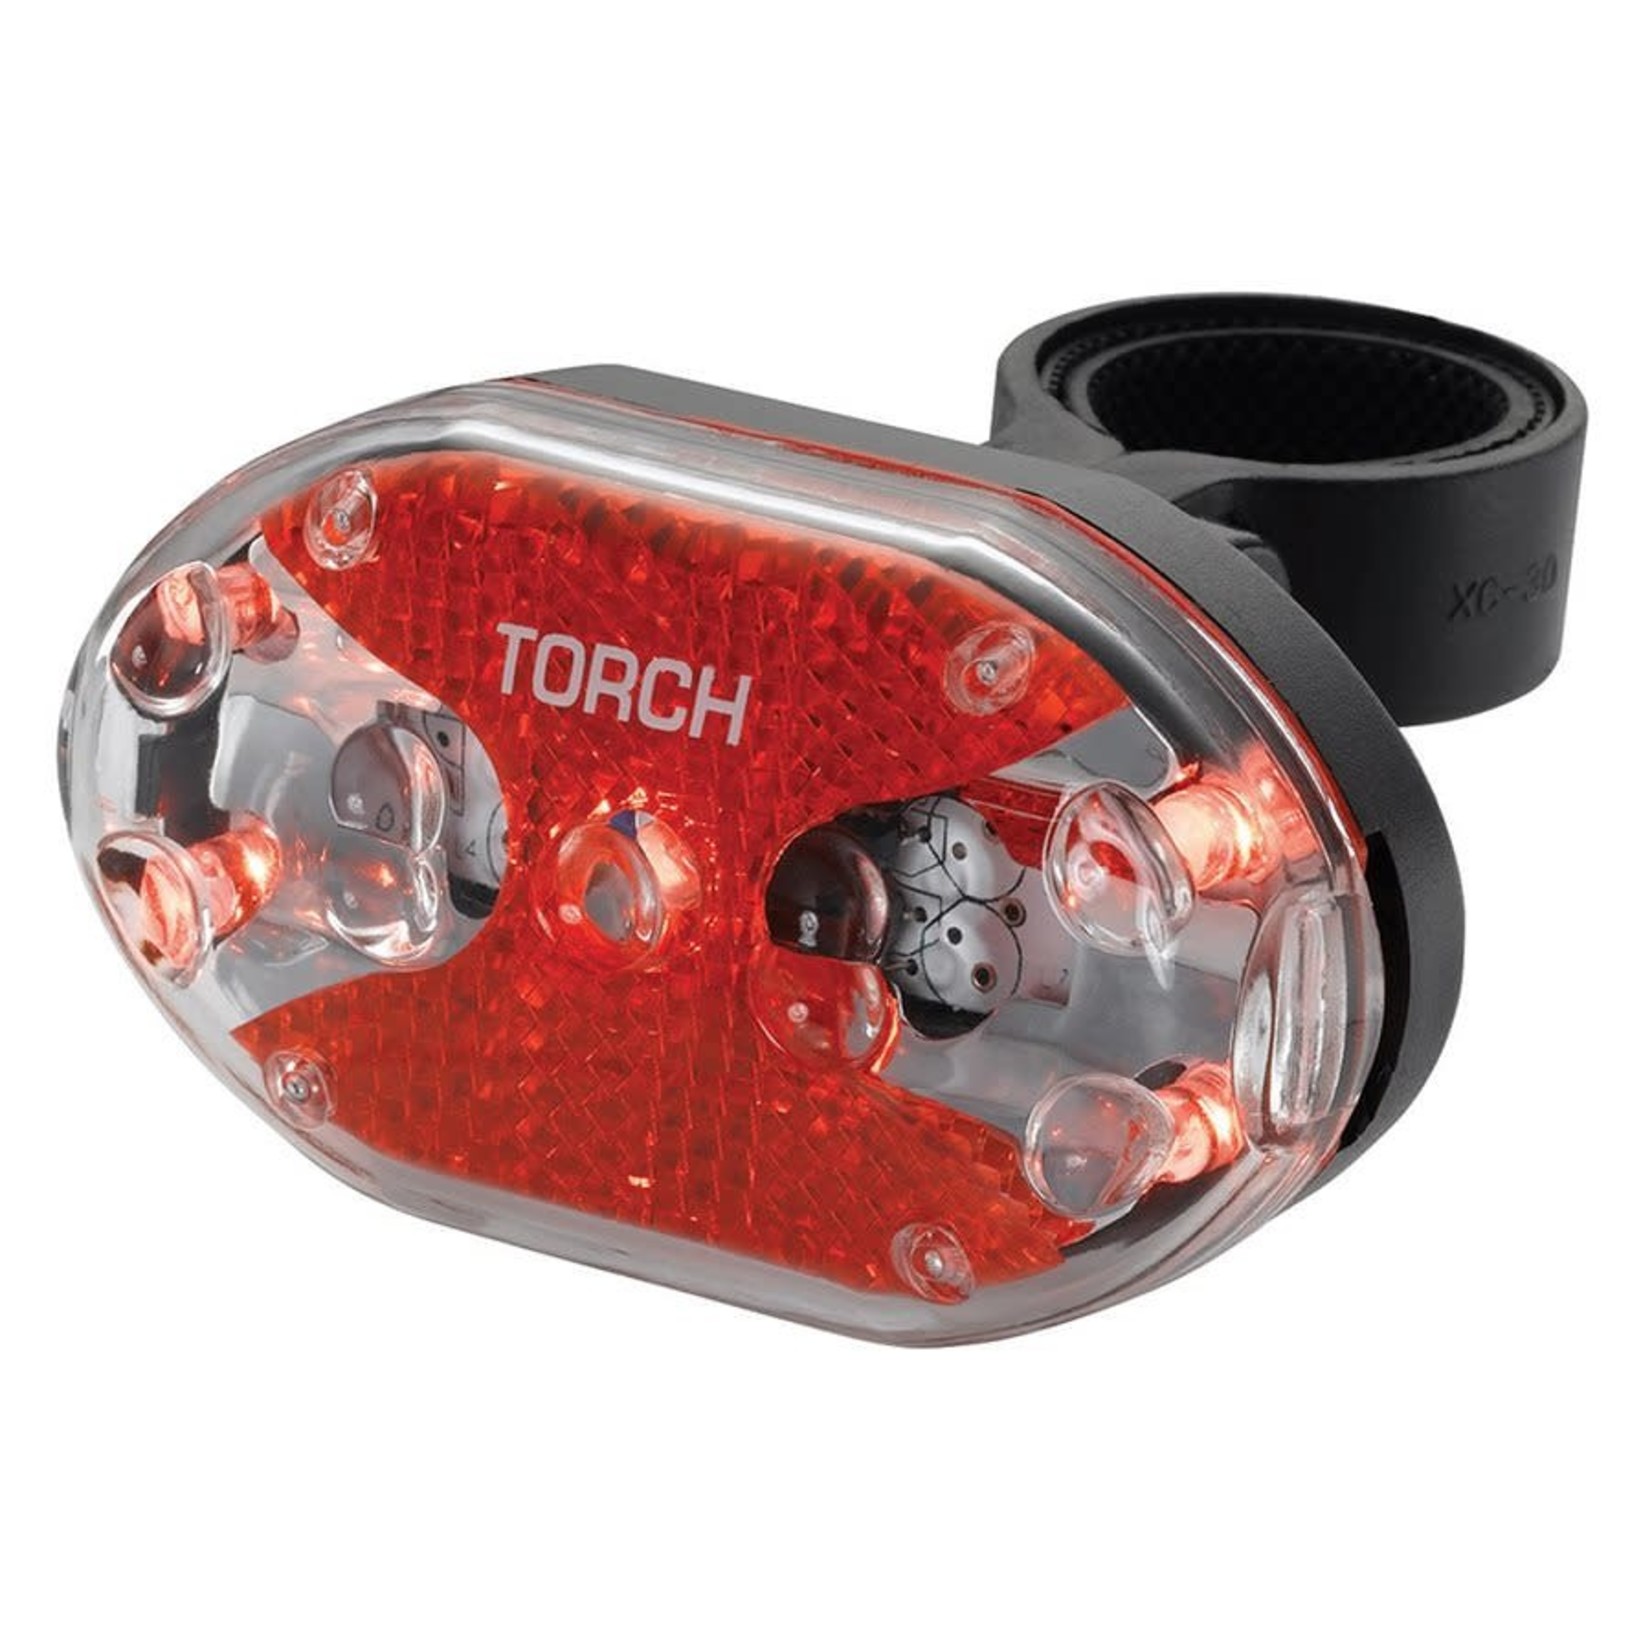 Torch Tailbright 5X